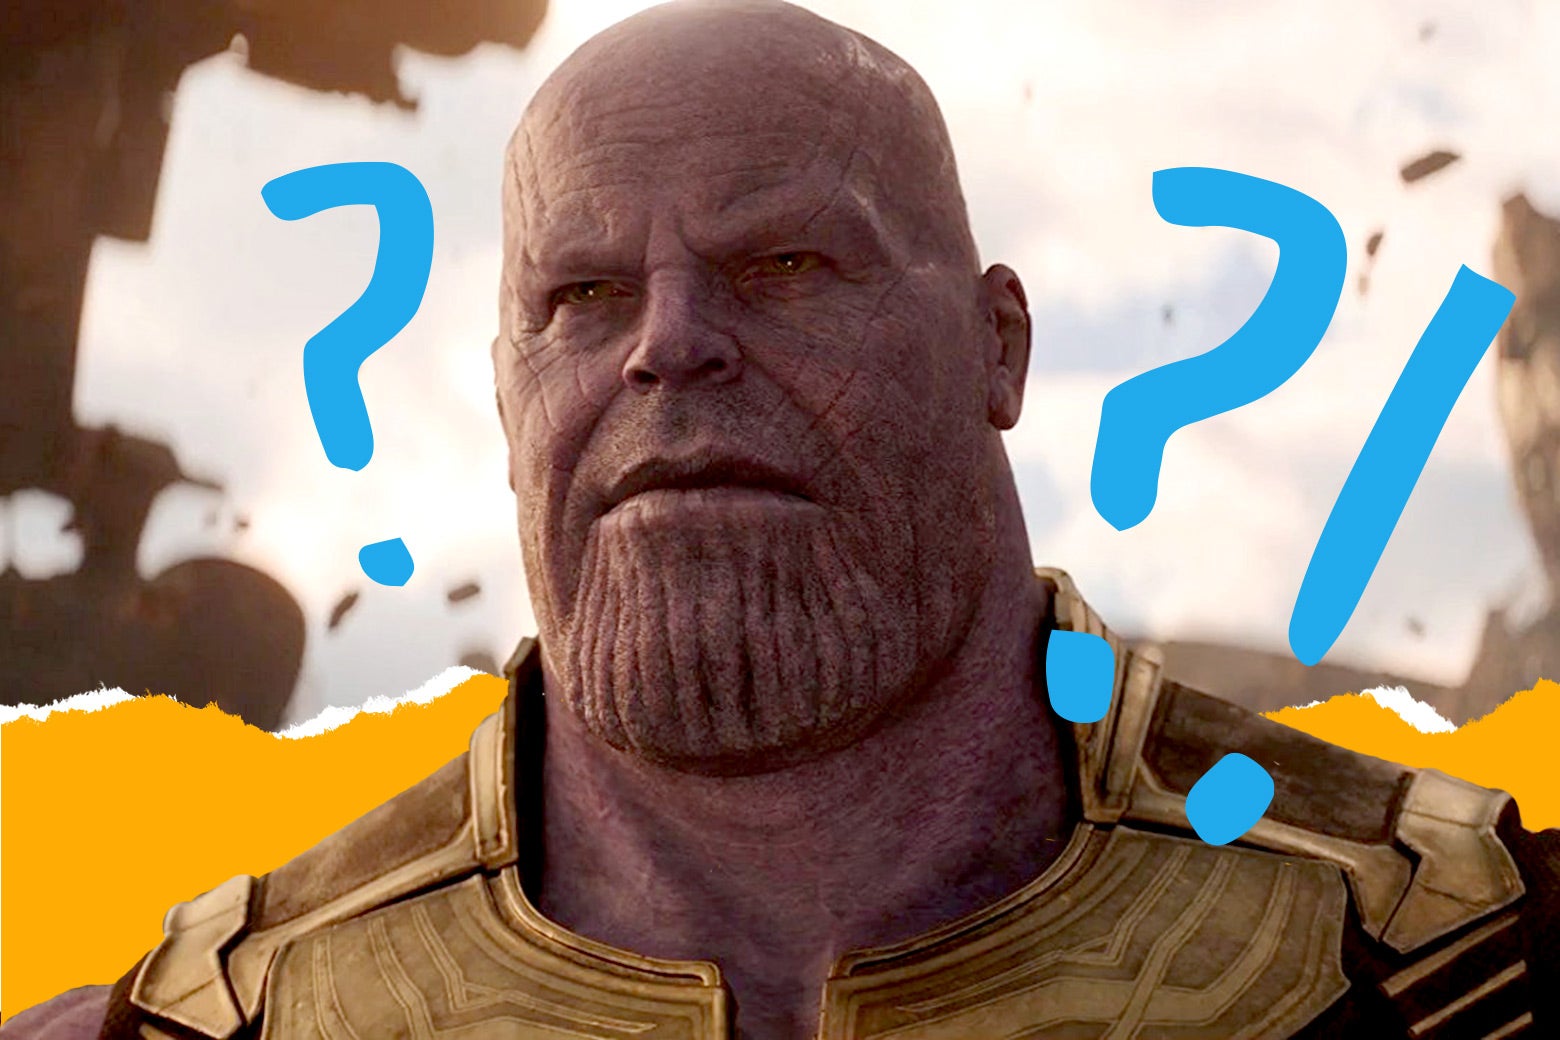 who died in infinity war movie